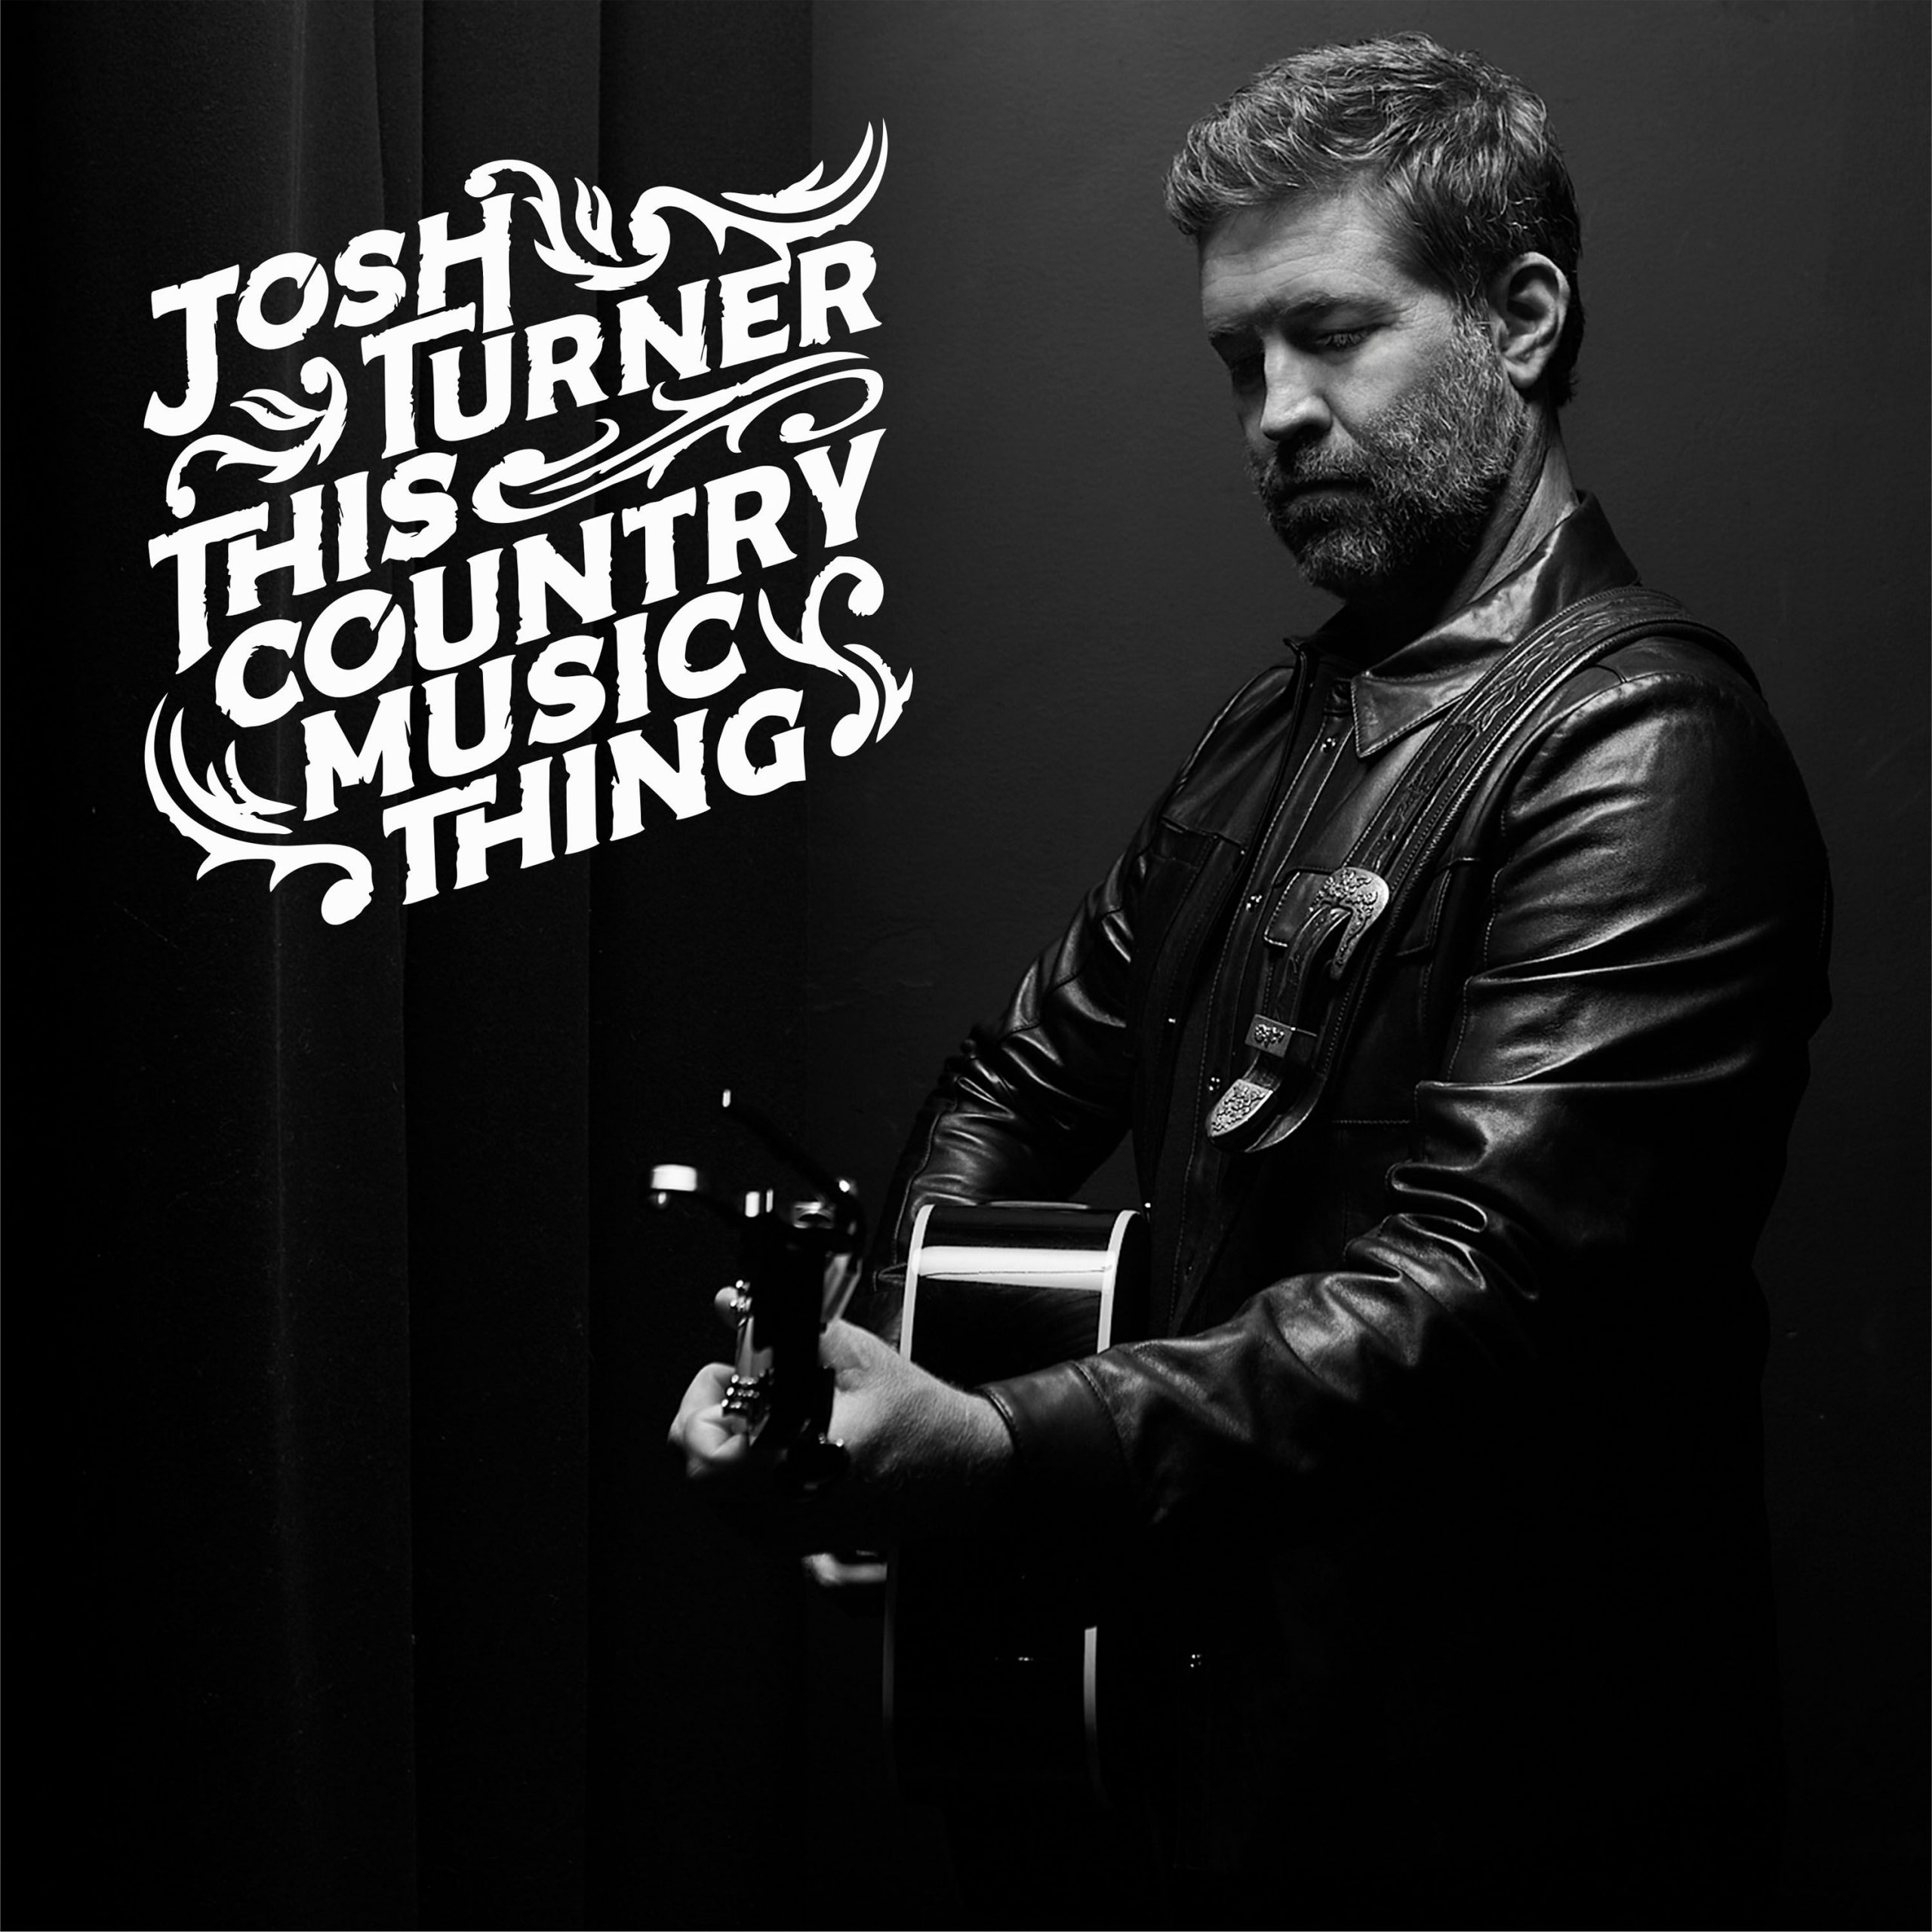 JOSH TURNER TO RELEASE NEW ALBUM ‘THIS COUNTRY MUSIC THING’ AUGUST 16